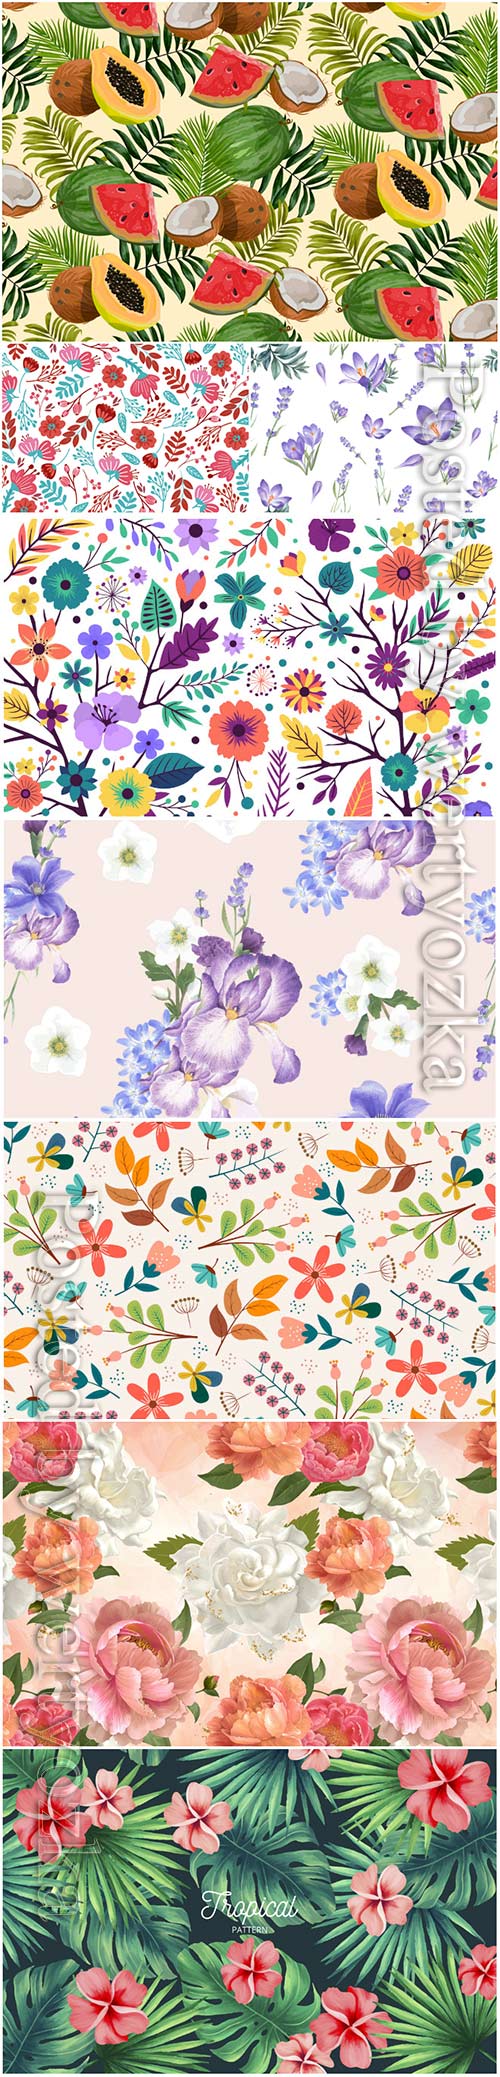 Seamless floral backgrounds in vector # 7